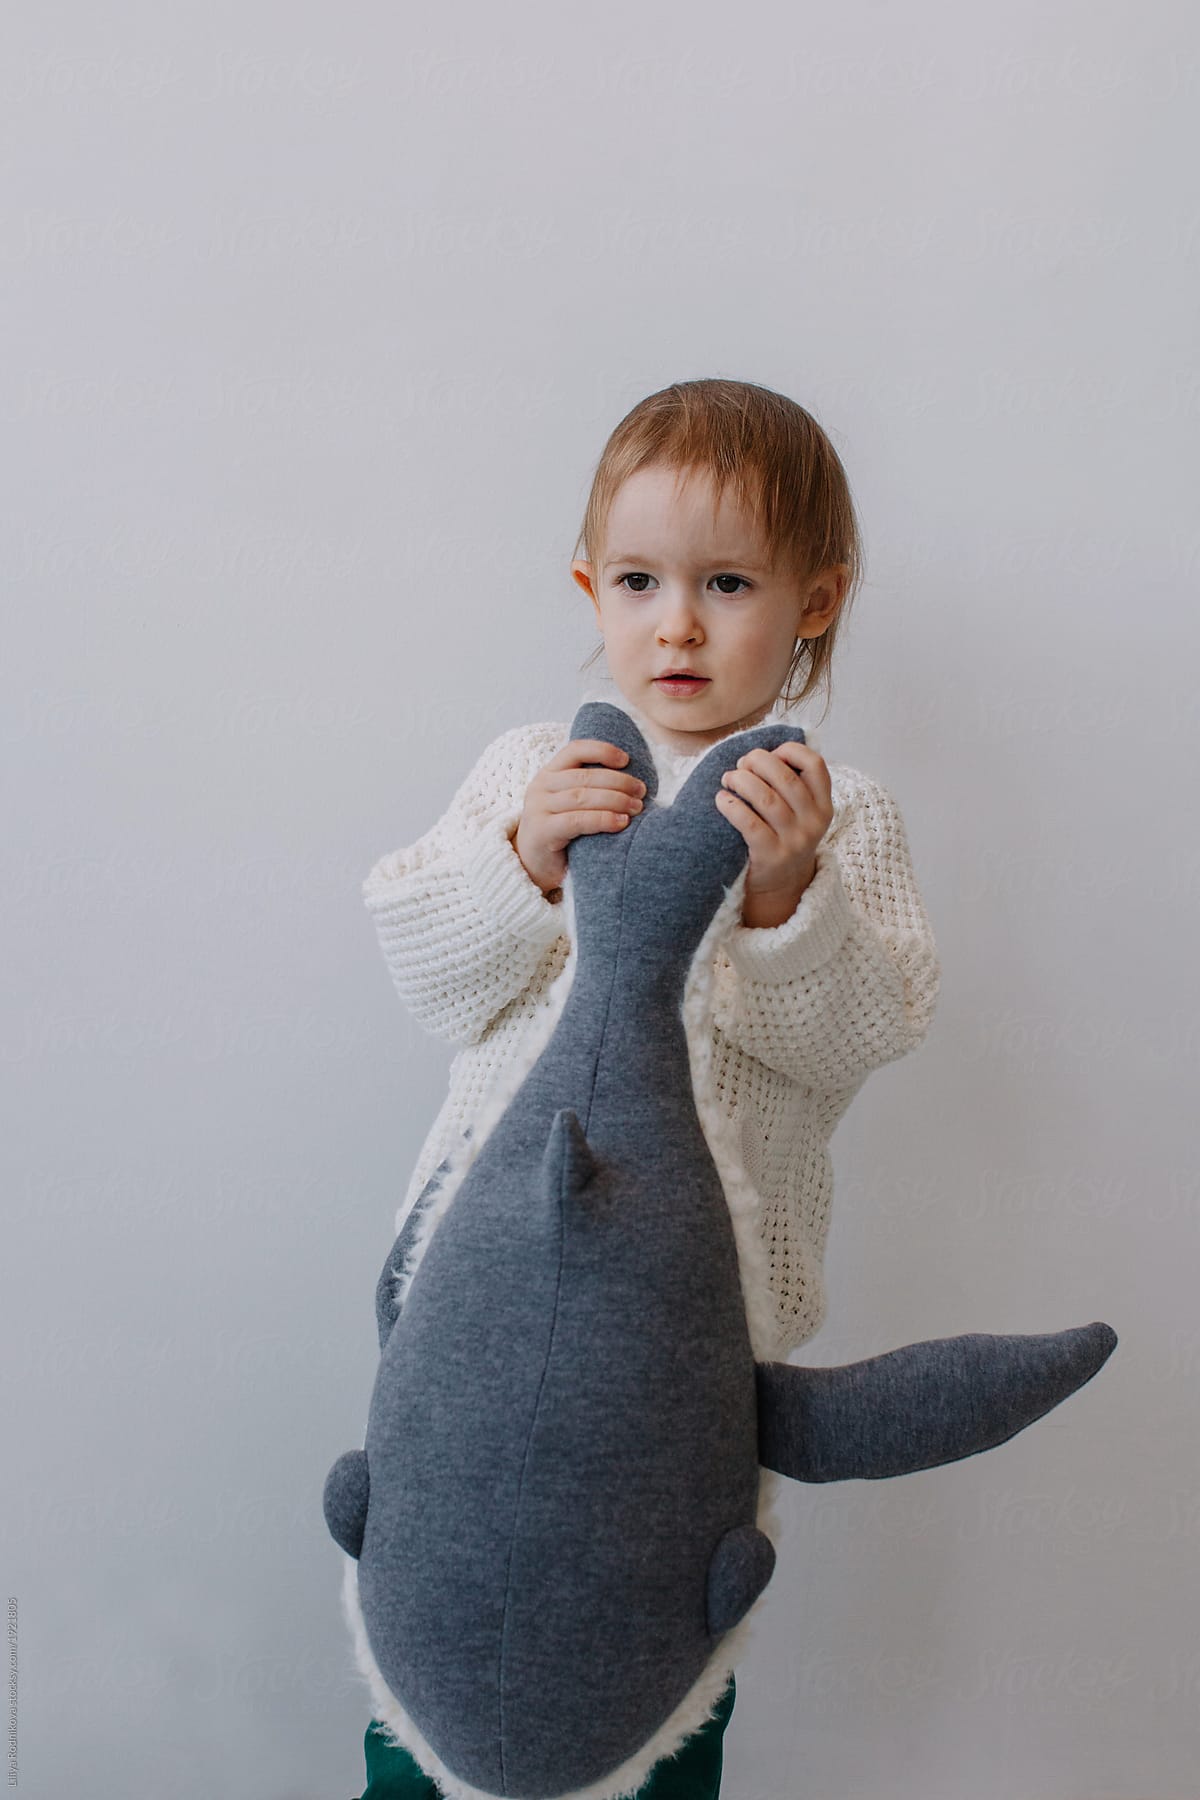 Lovely boy playing with plush whale by the white wall